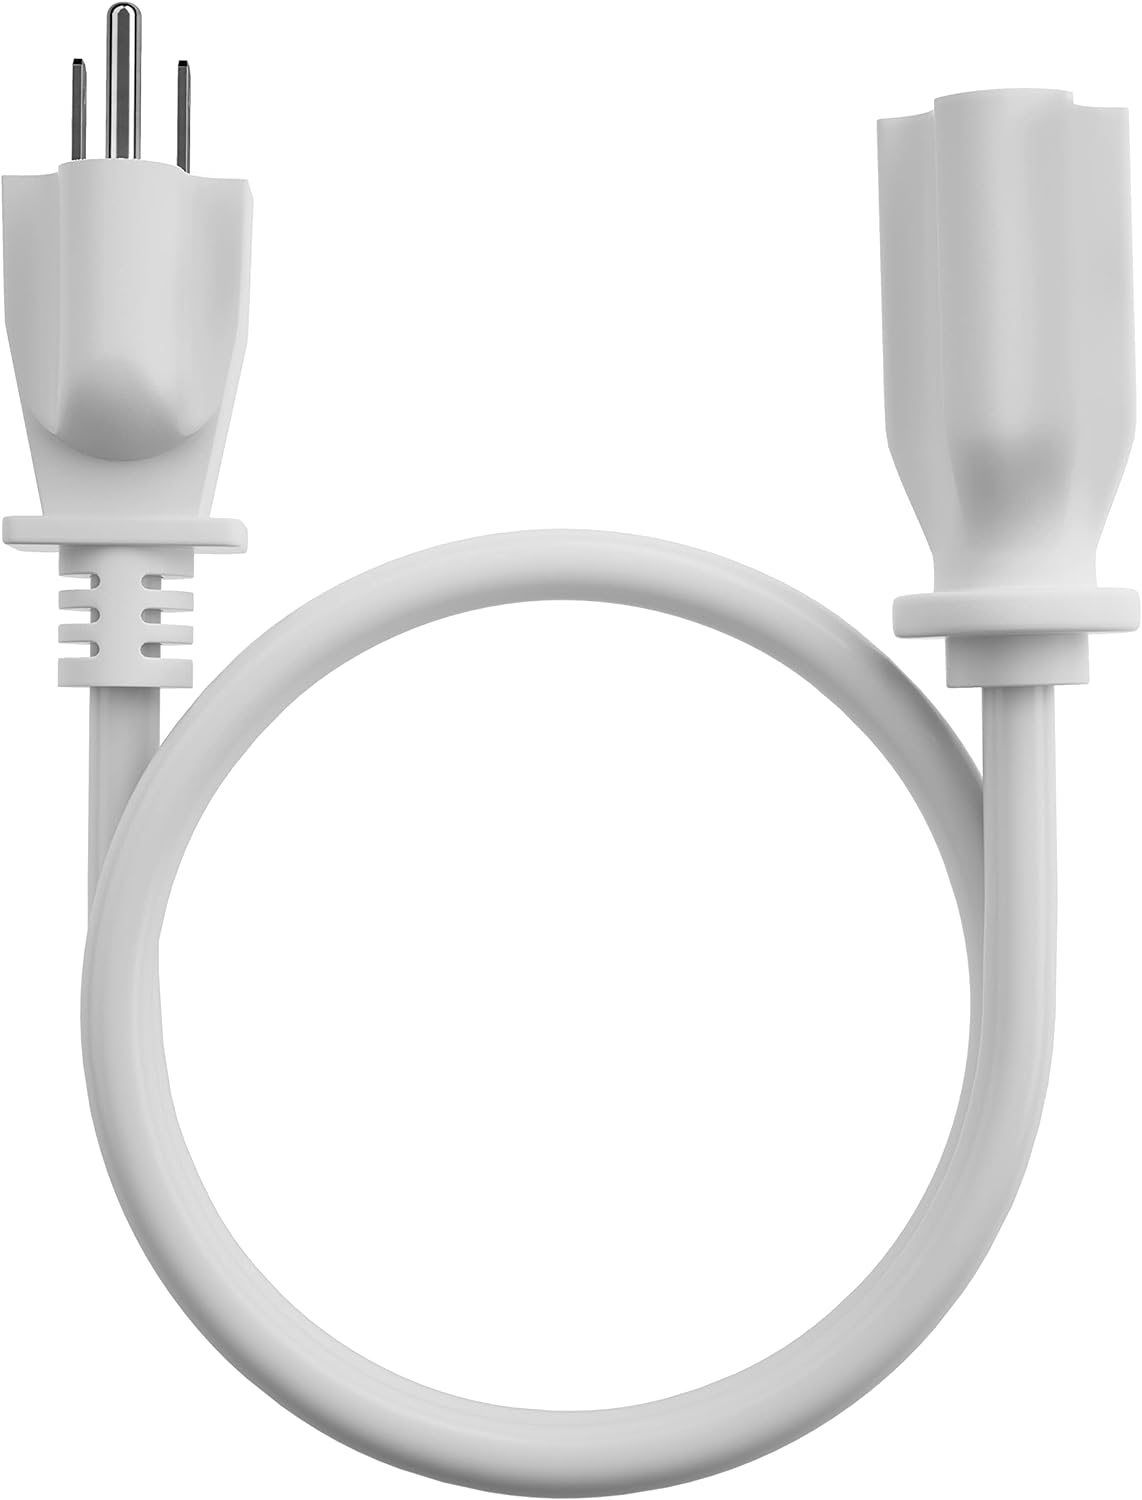 POWGRN Short Extension Cord 1 Foot White, 16/3 Gauge Indoor Power Extension Cable, 13A 125V 1625W 16AWG, 3 Prong Outlet Saver NEMA 5-1